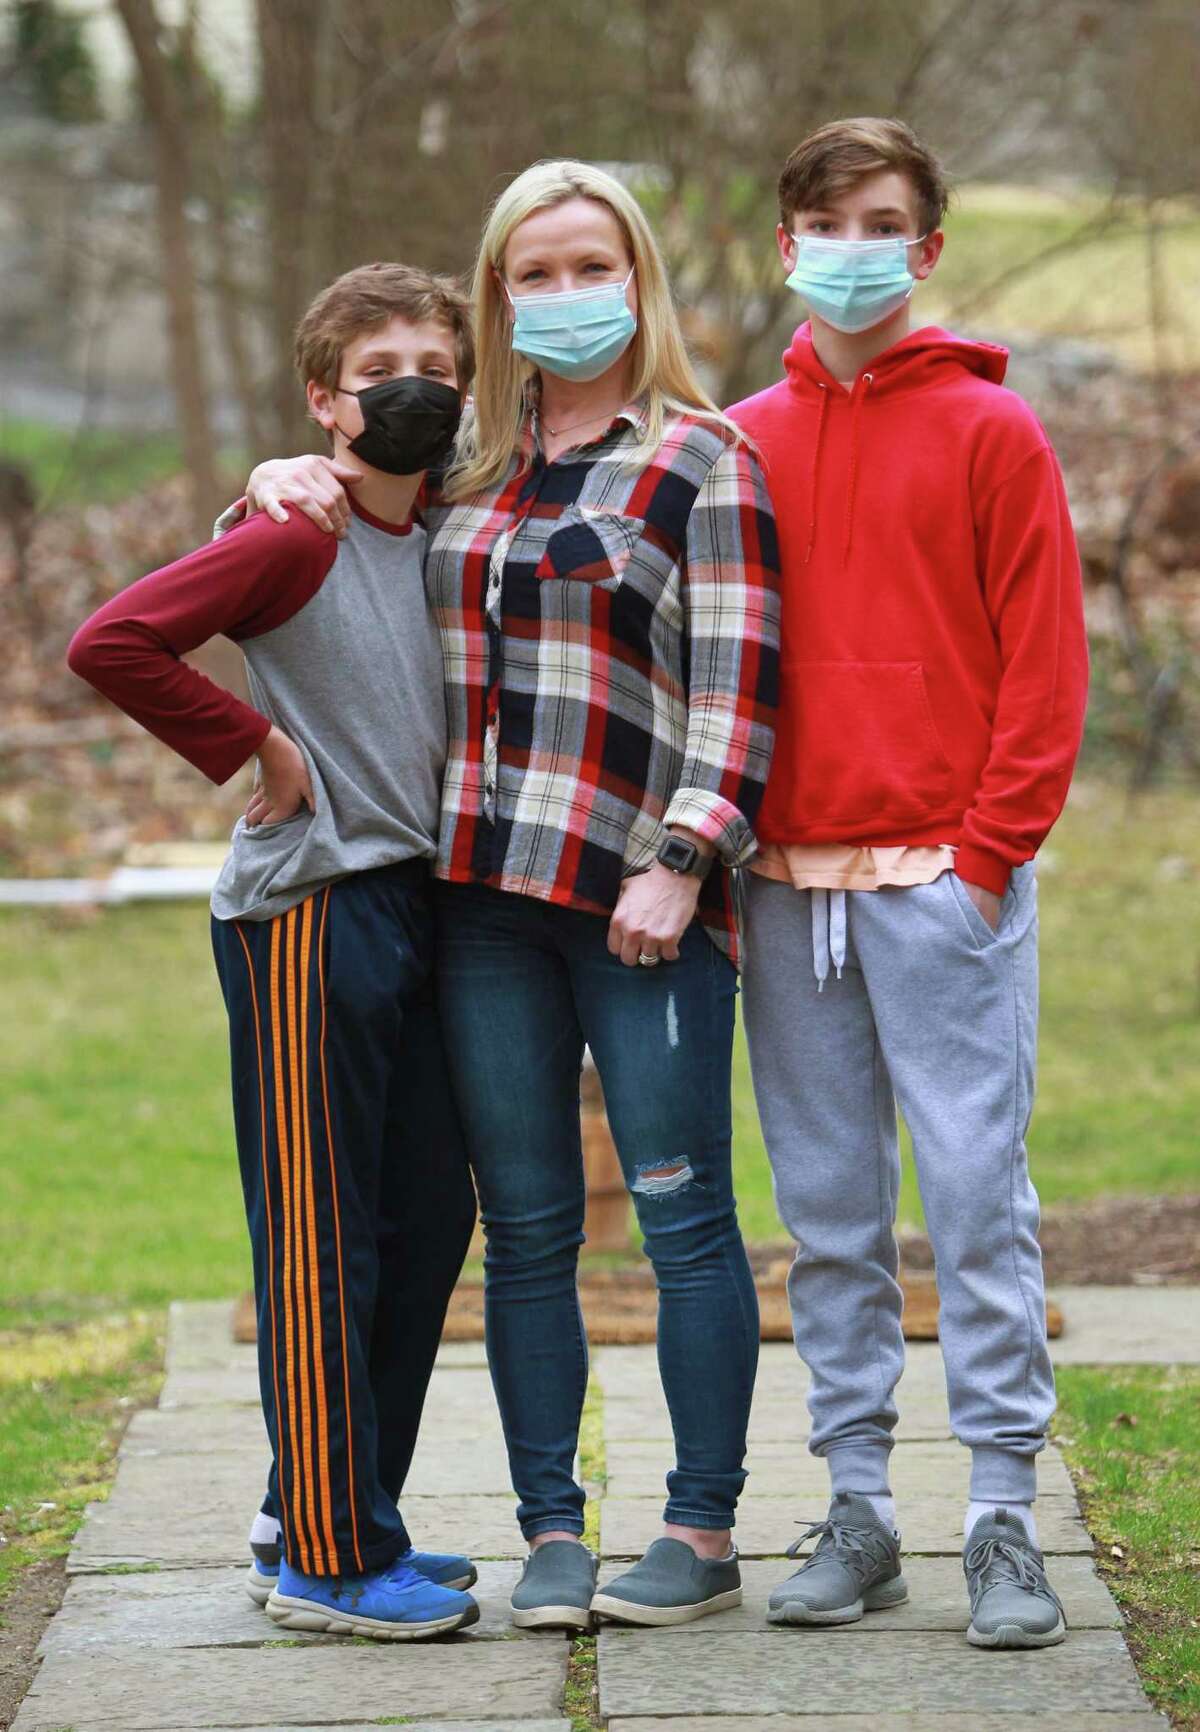 Kristina Gregory, center, poses with her sons Nathan, 12, left, and Peter, 15, at their home in Darien, Conn., on Wednesday March 31, 2021. Gregory is supportive of getting her sons vaccinated when they are eligible after having a tough journey with COVID a year ago that continues to have lingering effects.